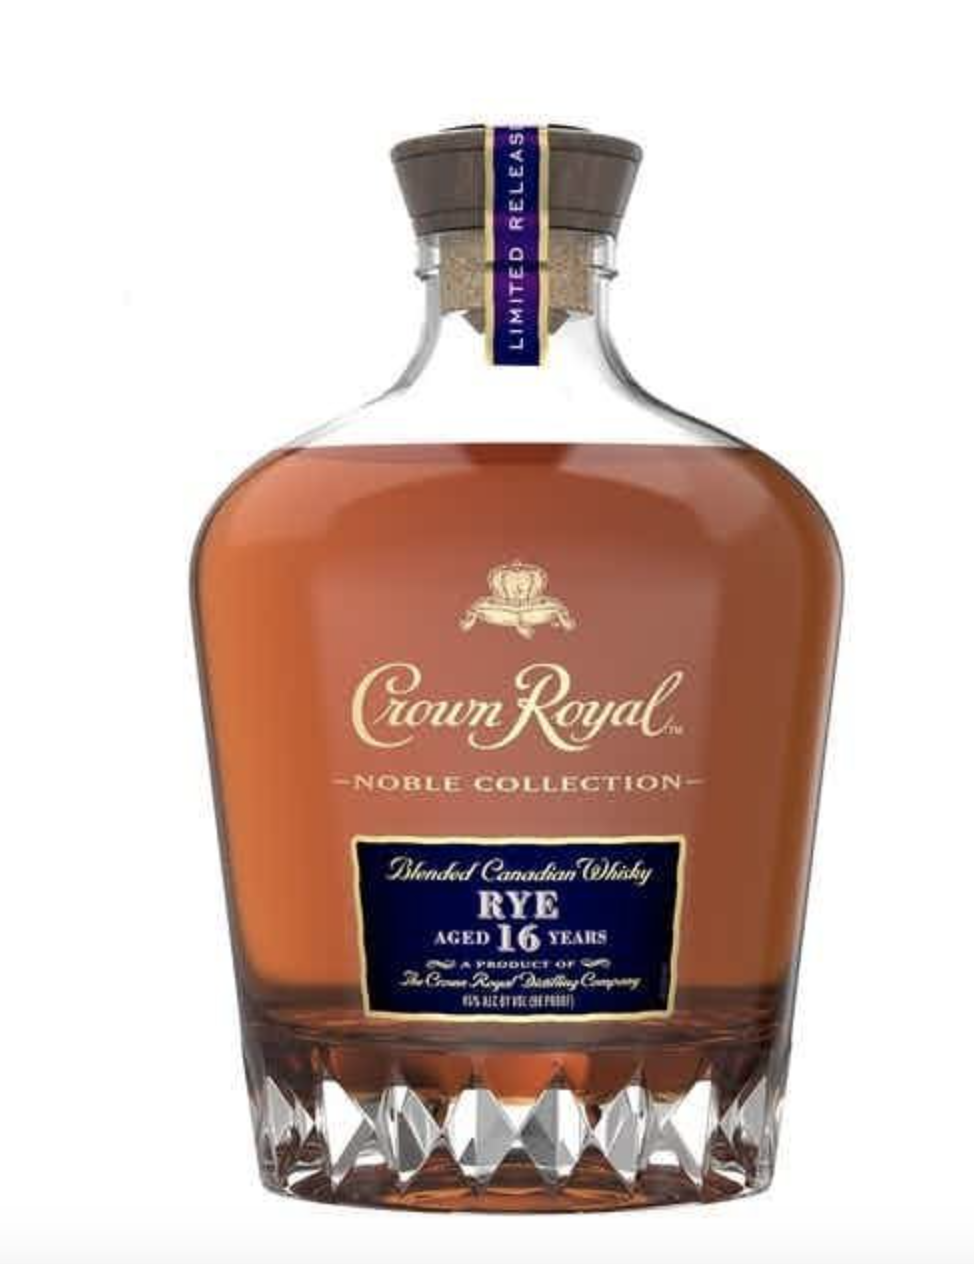 crown royal noble collection french oak